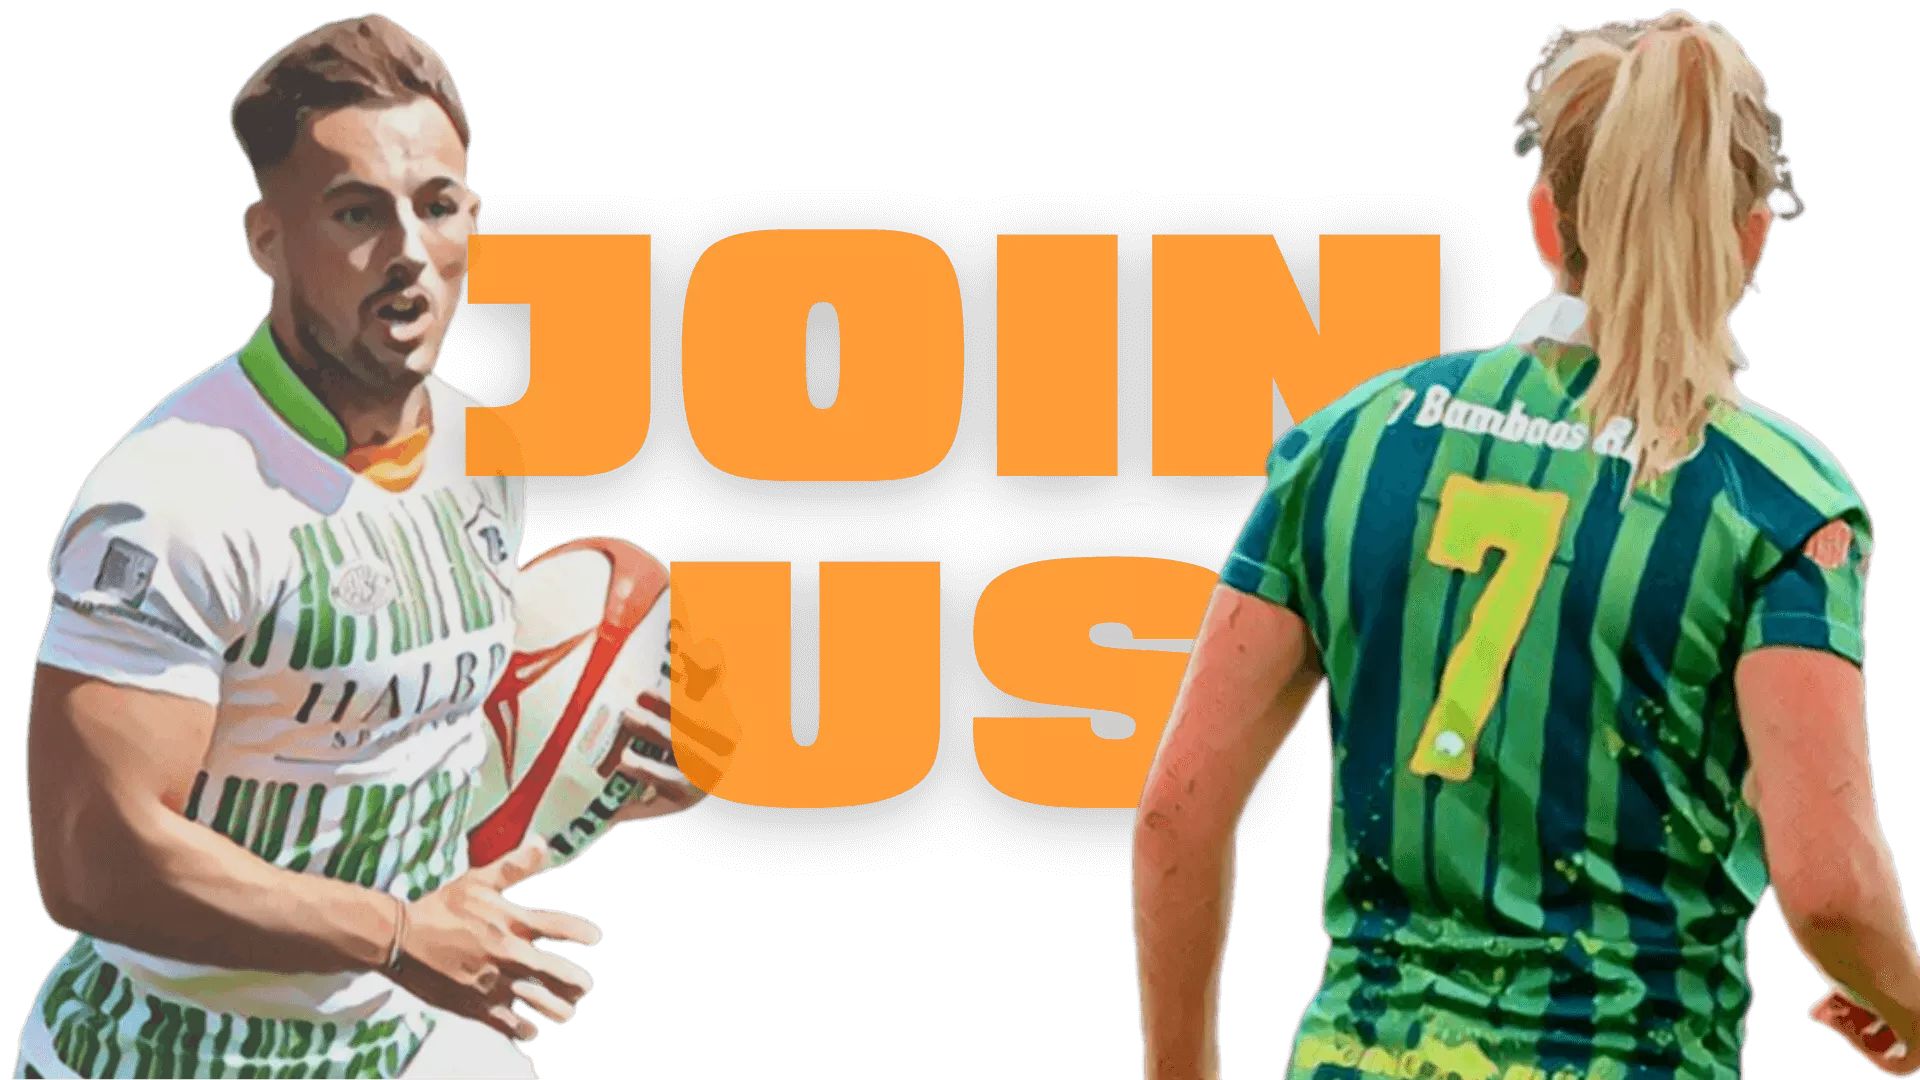 New Join Us Banner for 7 Bamboos RFC